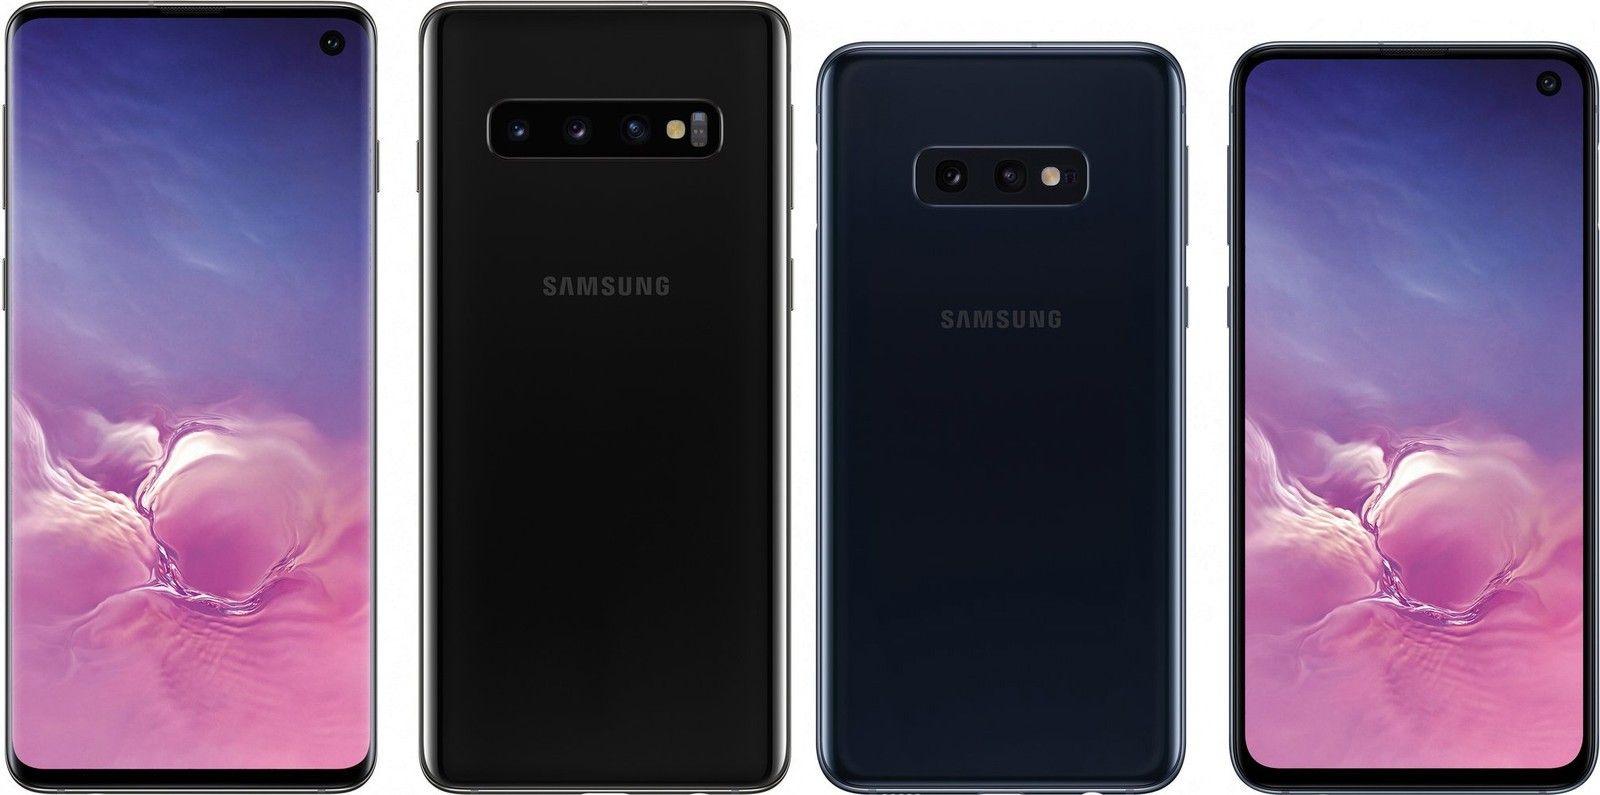 Attached Two Red XS Logo - Samsung Galaxy S10: News, Rumors, Release Date, Specs, and More